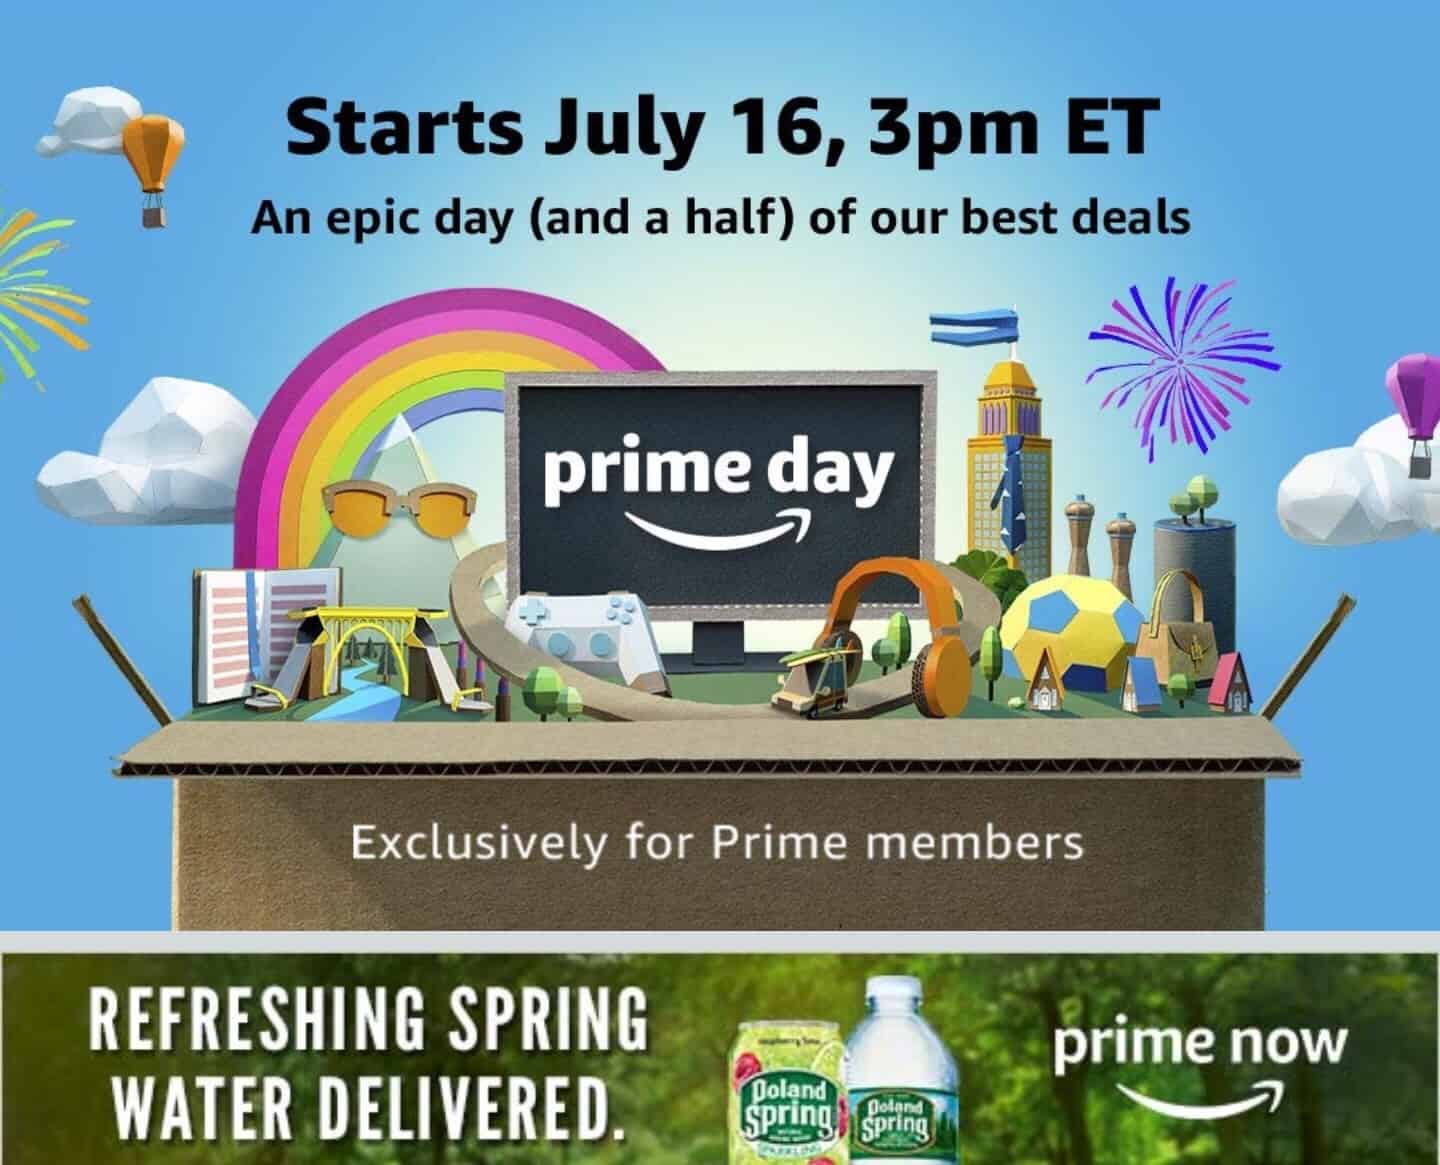 Amazon Prime Day 2018 July 16th Mark Your Calendars!